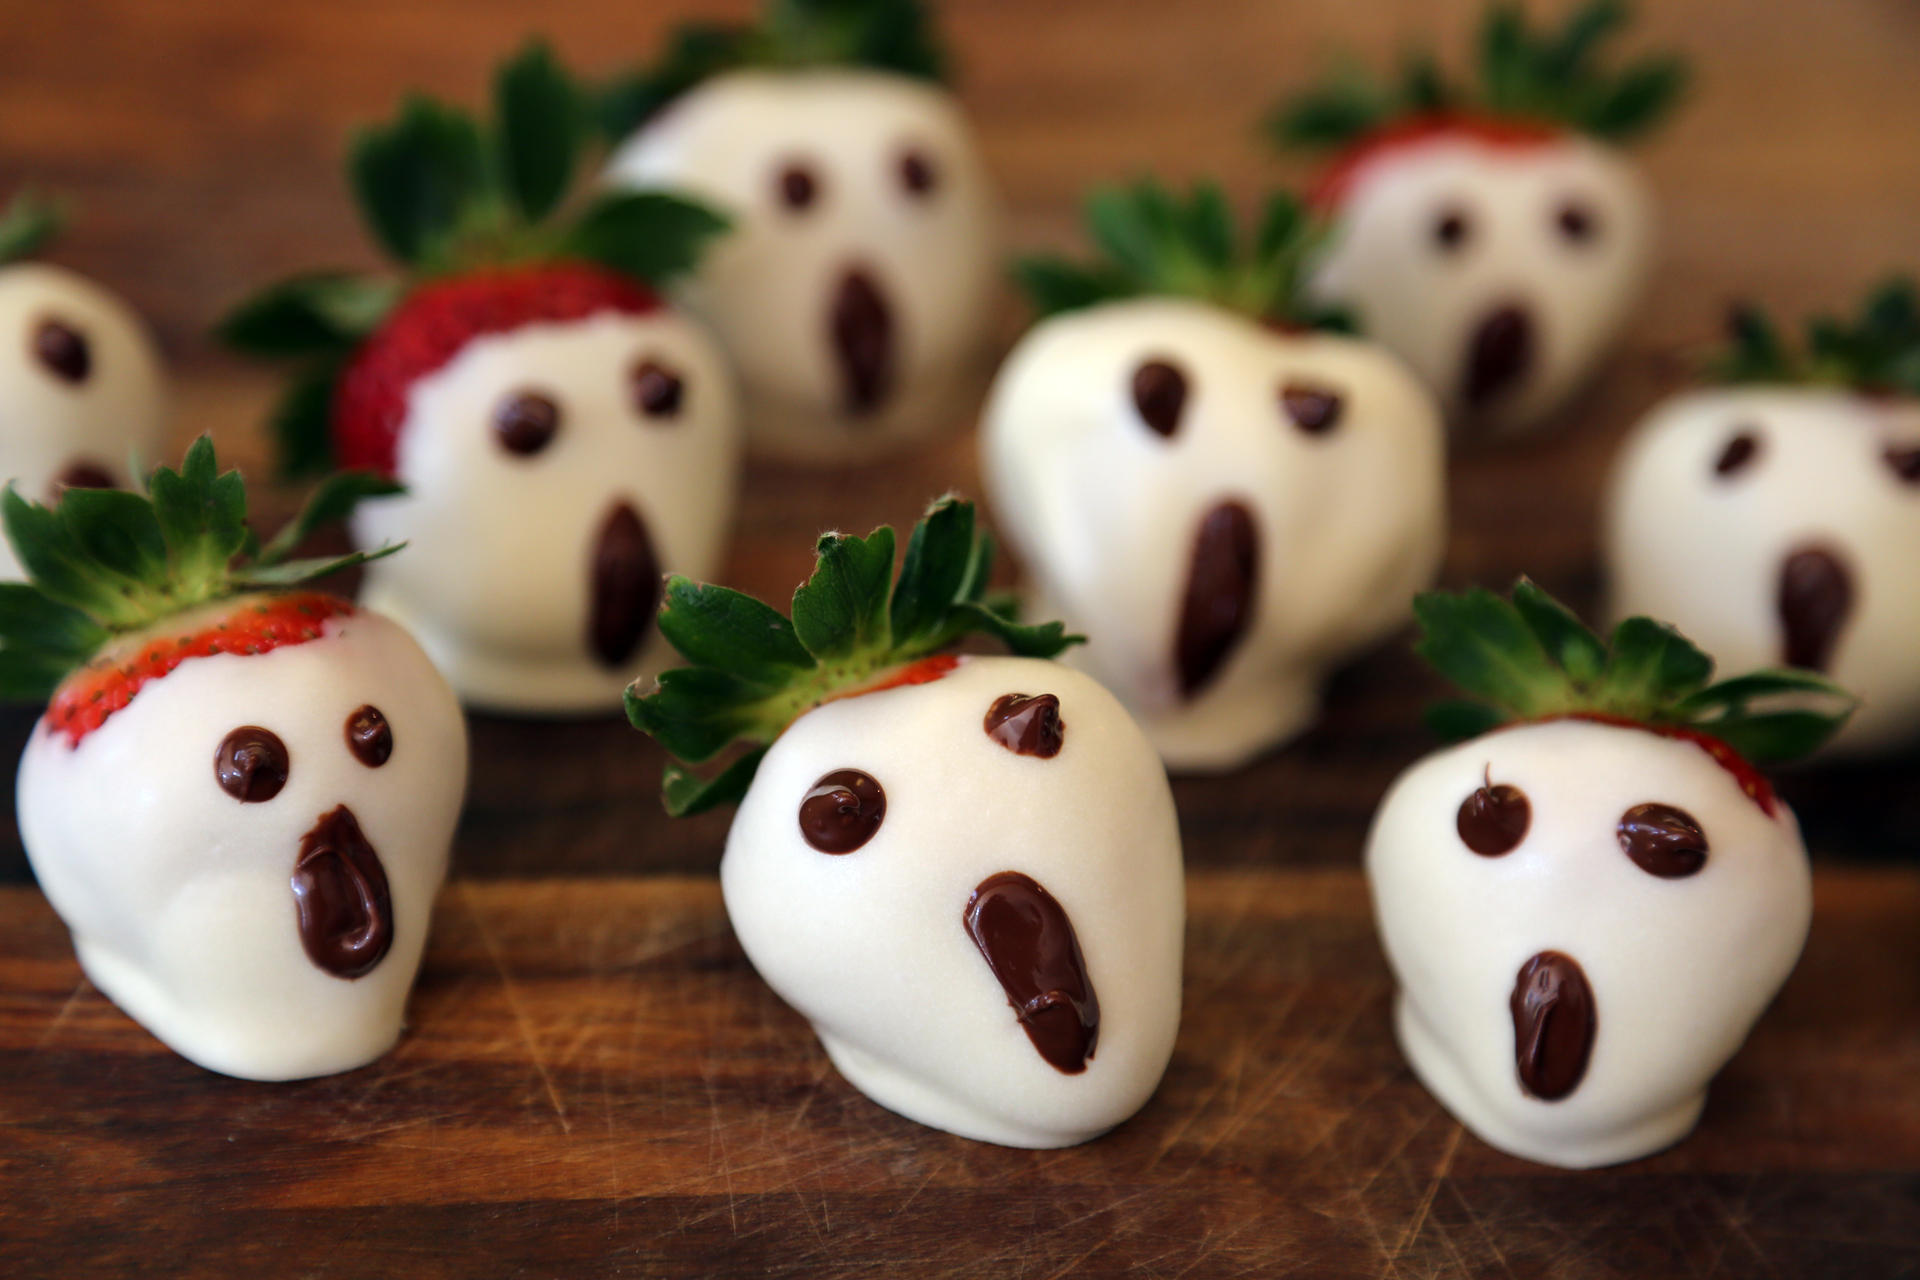 Halloween White Chocolate Dipped Strawberry Ghosts